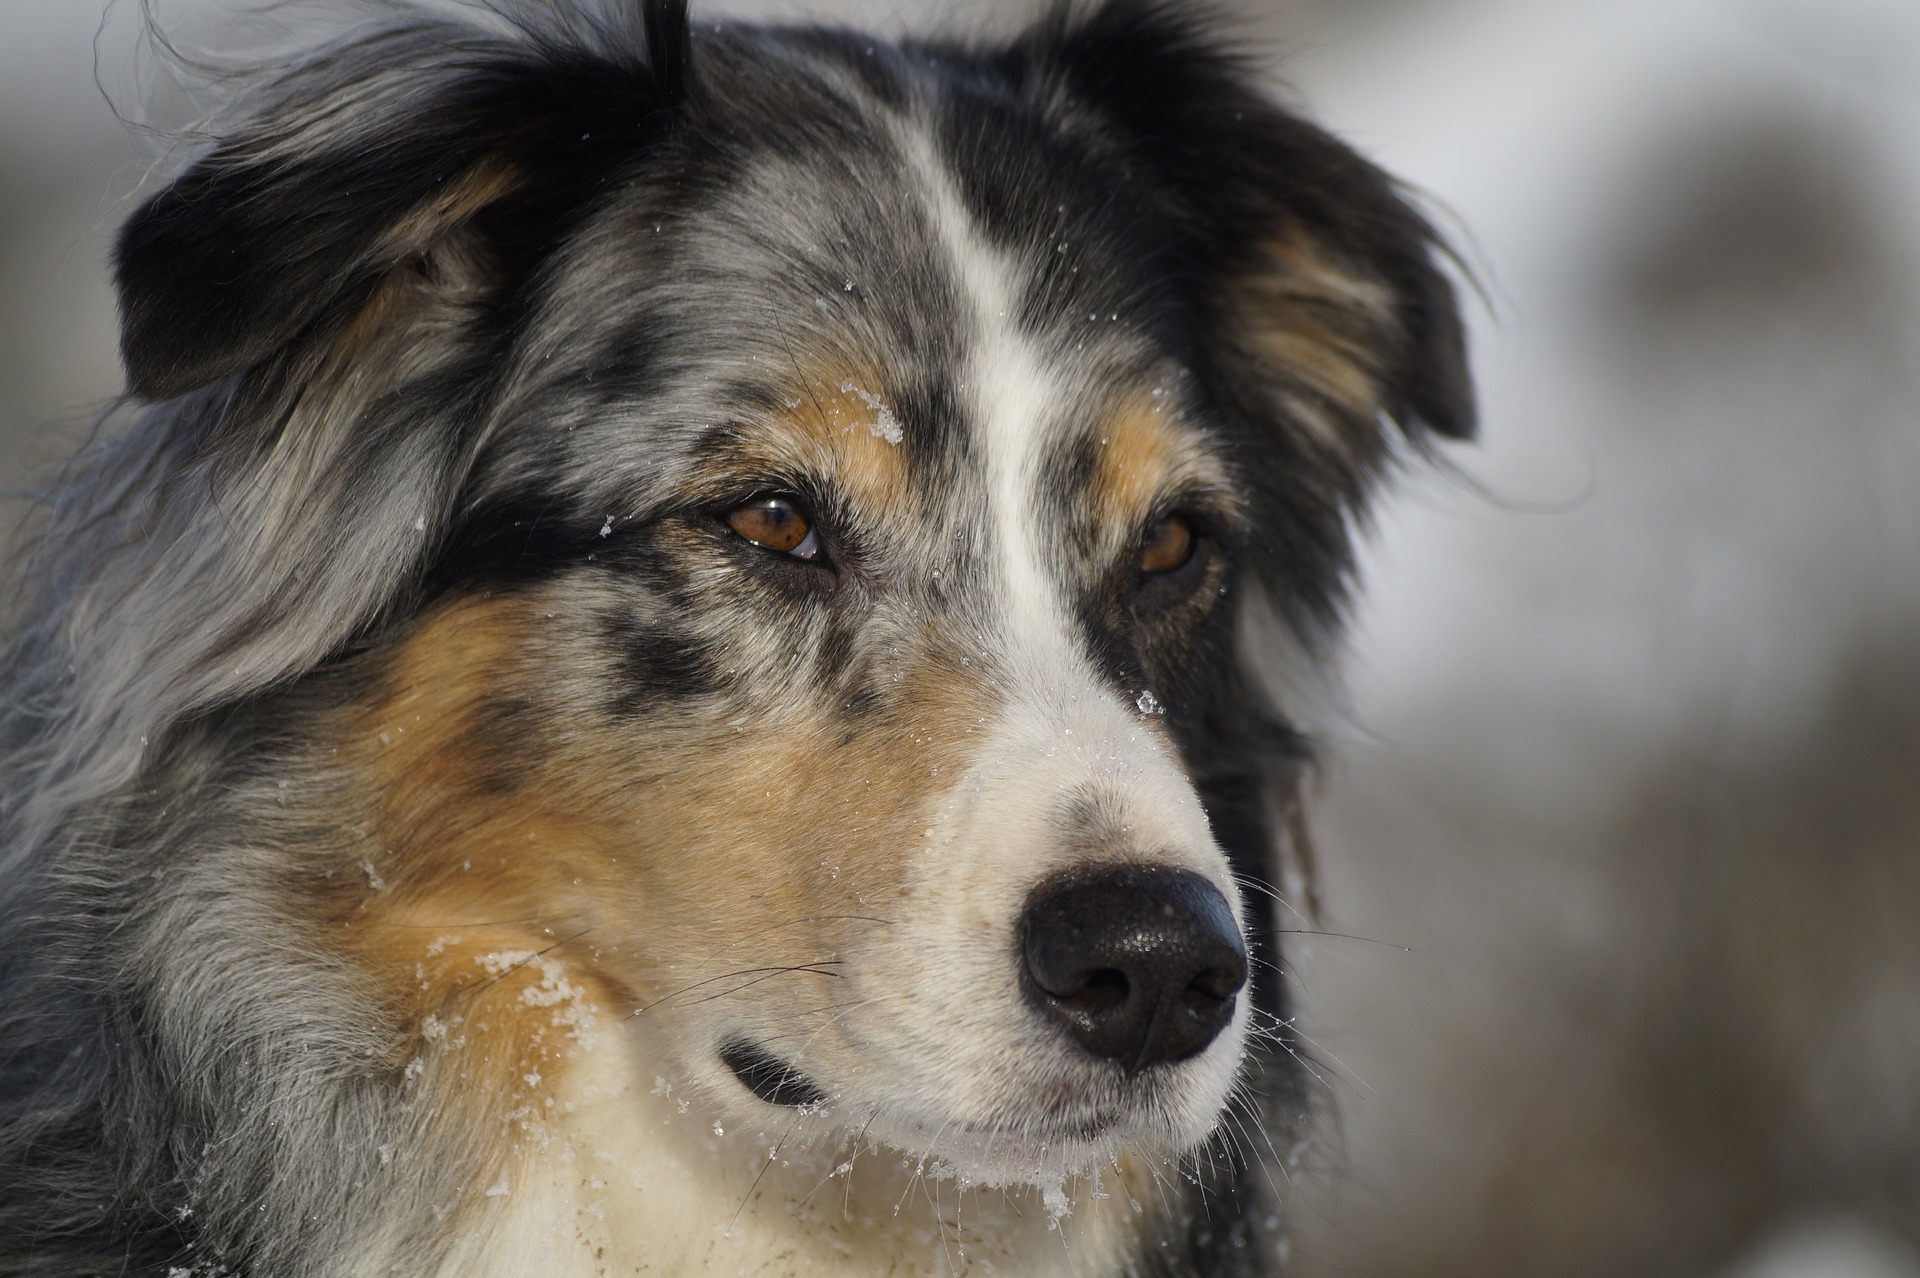 All About Merle Aussies: The Genetic Mutation that Makes Us Do a Double Take!